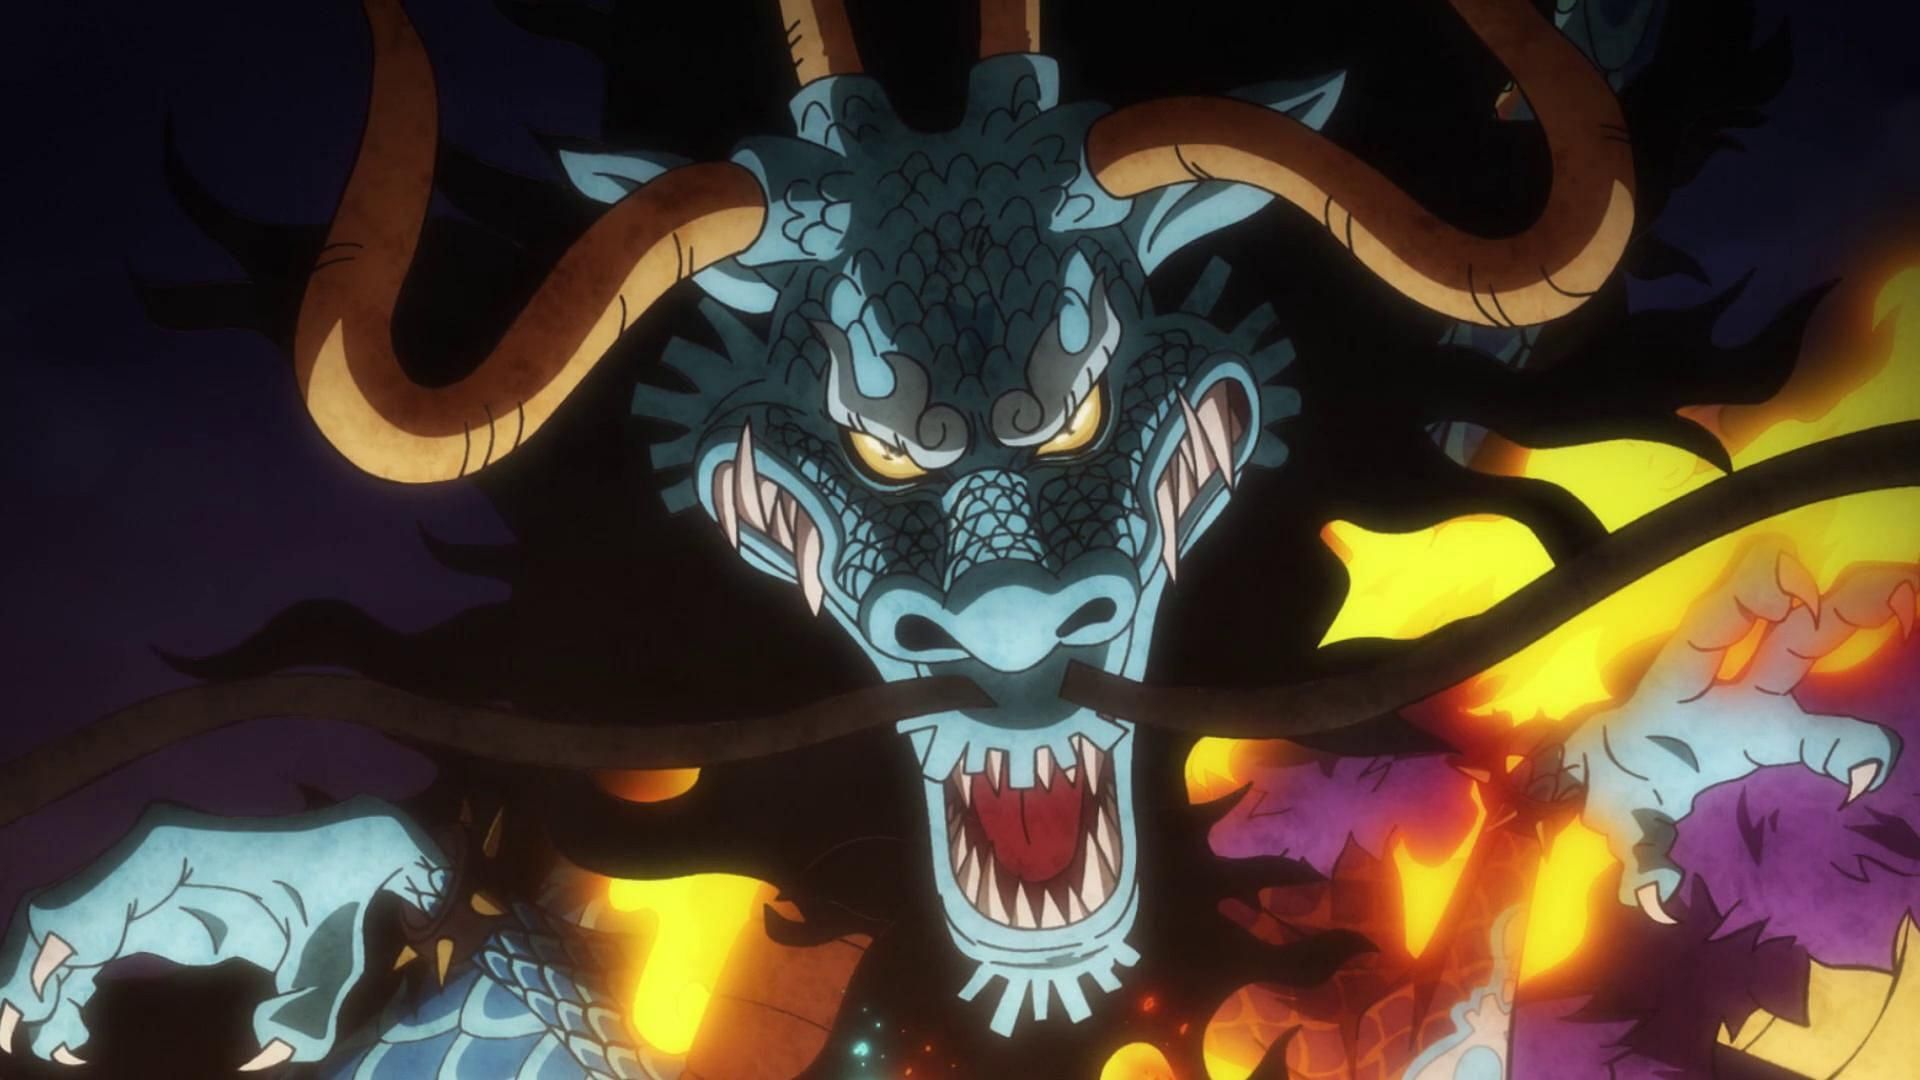 The mystical dragon of Wano seems to be near his limit in One Piece chapter 1046&#039;s final moments (Image Credits: Eiichiro Oda/Shueisha, Viz Media, One Piece)